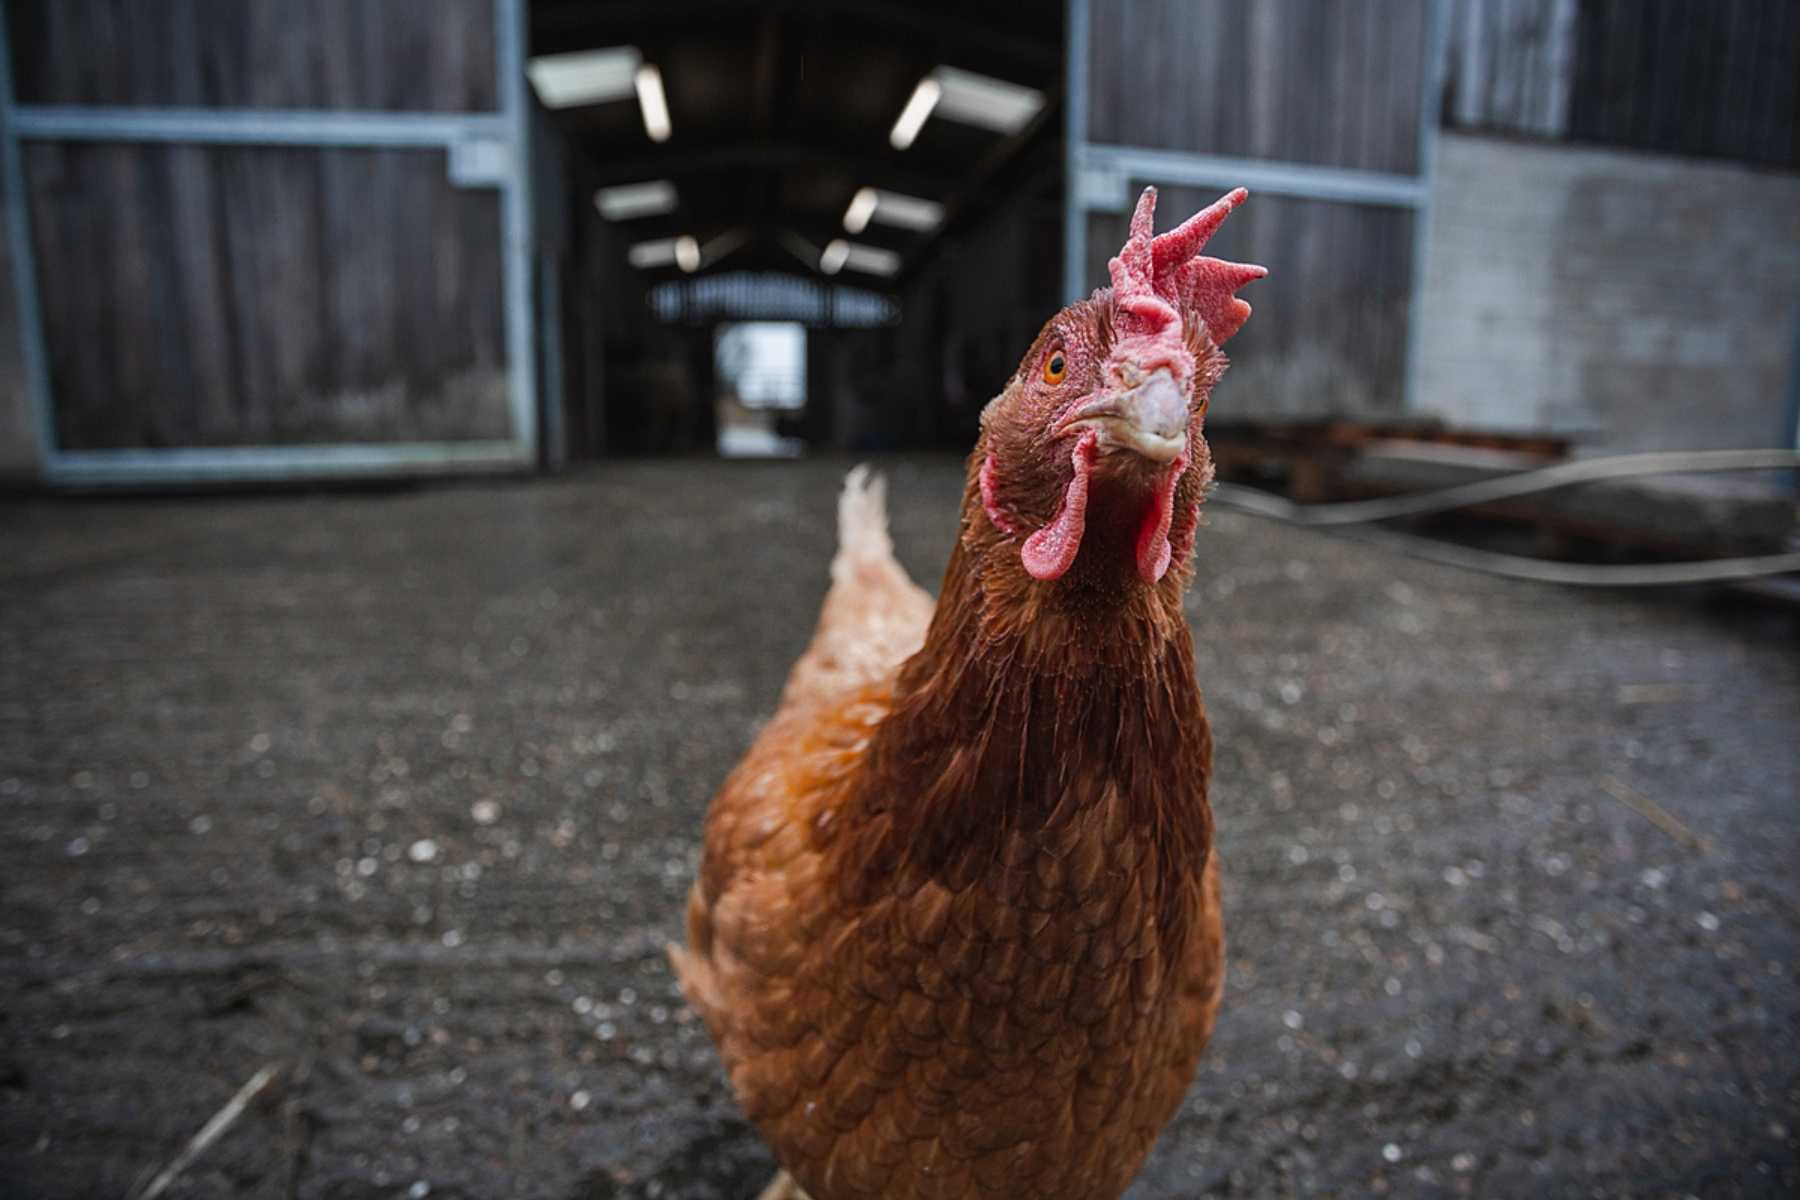 Camila, rescued from the egg industry where she lived as a 'battery hen', walks out of the main shelter at Surge Sanctuary to look curiously into the camera.